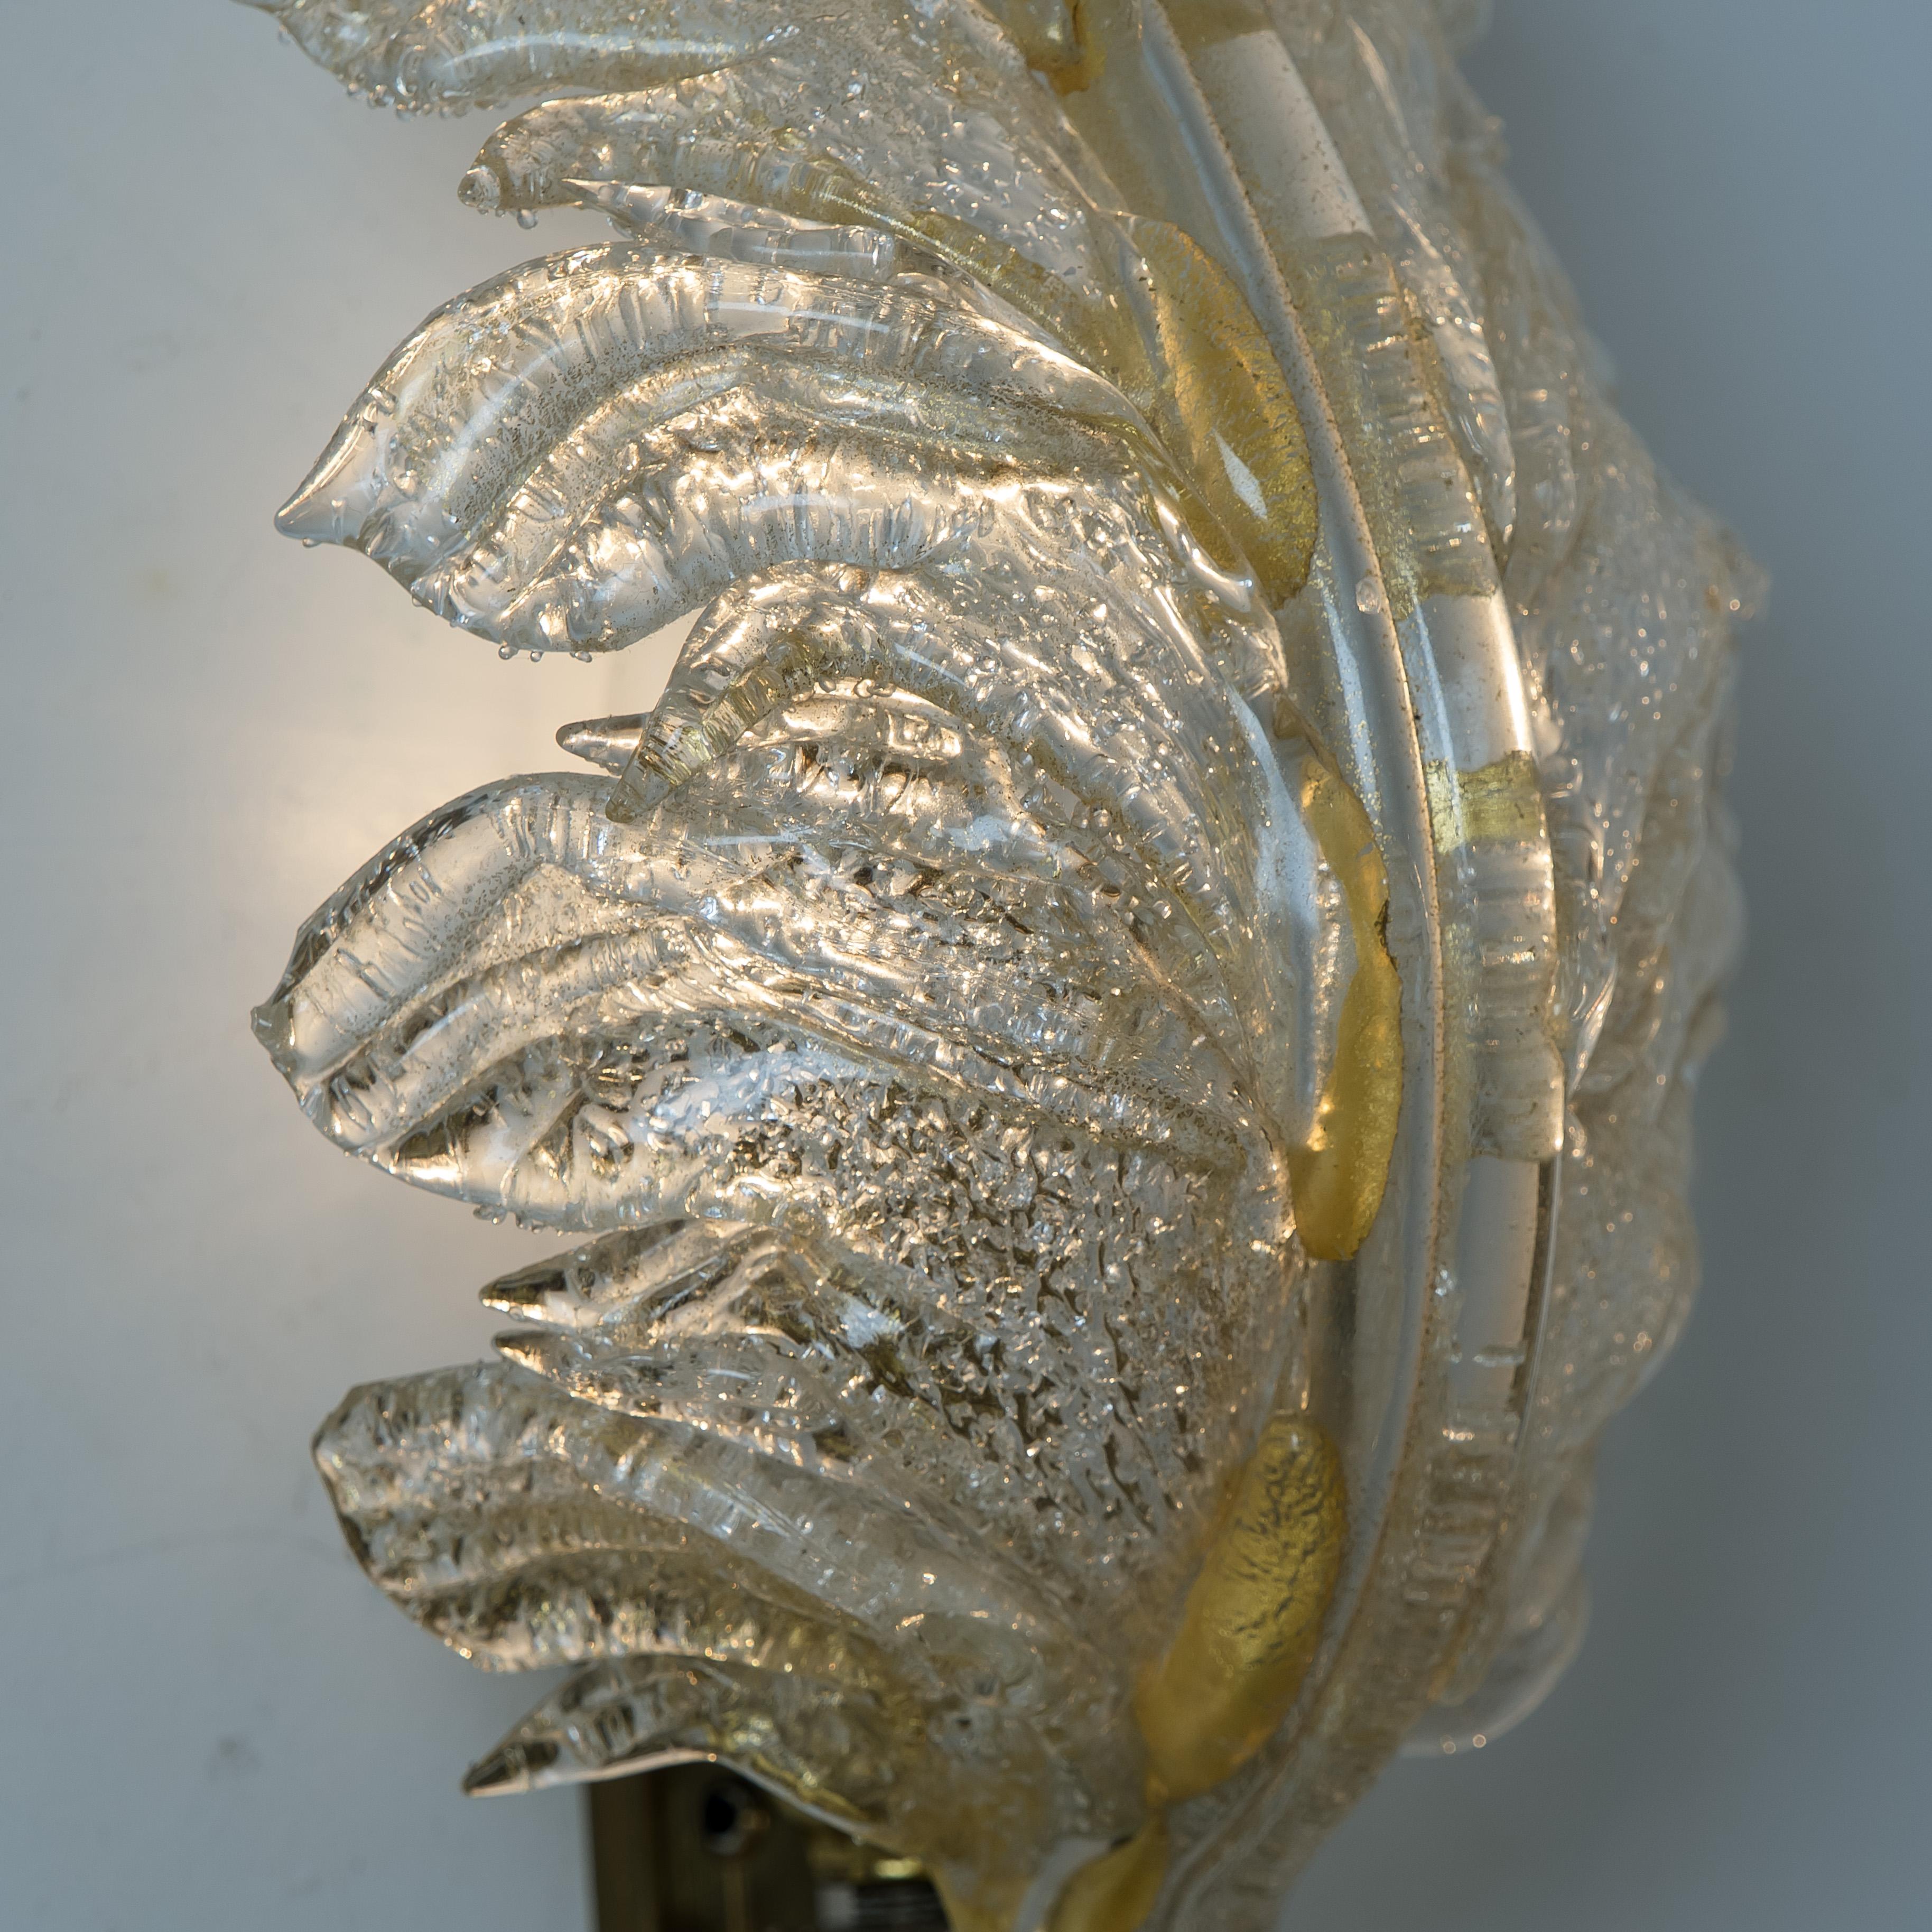 A pair of elegant and exquisite hand blown Murano glass Barovier & Toso wall sconces with special gold inclusions. Each light fixture consists one blown Murano glass leave. Mounted on a brass frame. The leaves refract light beautifully. The flush